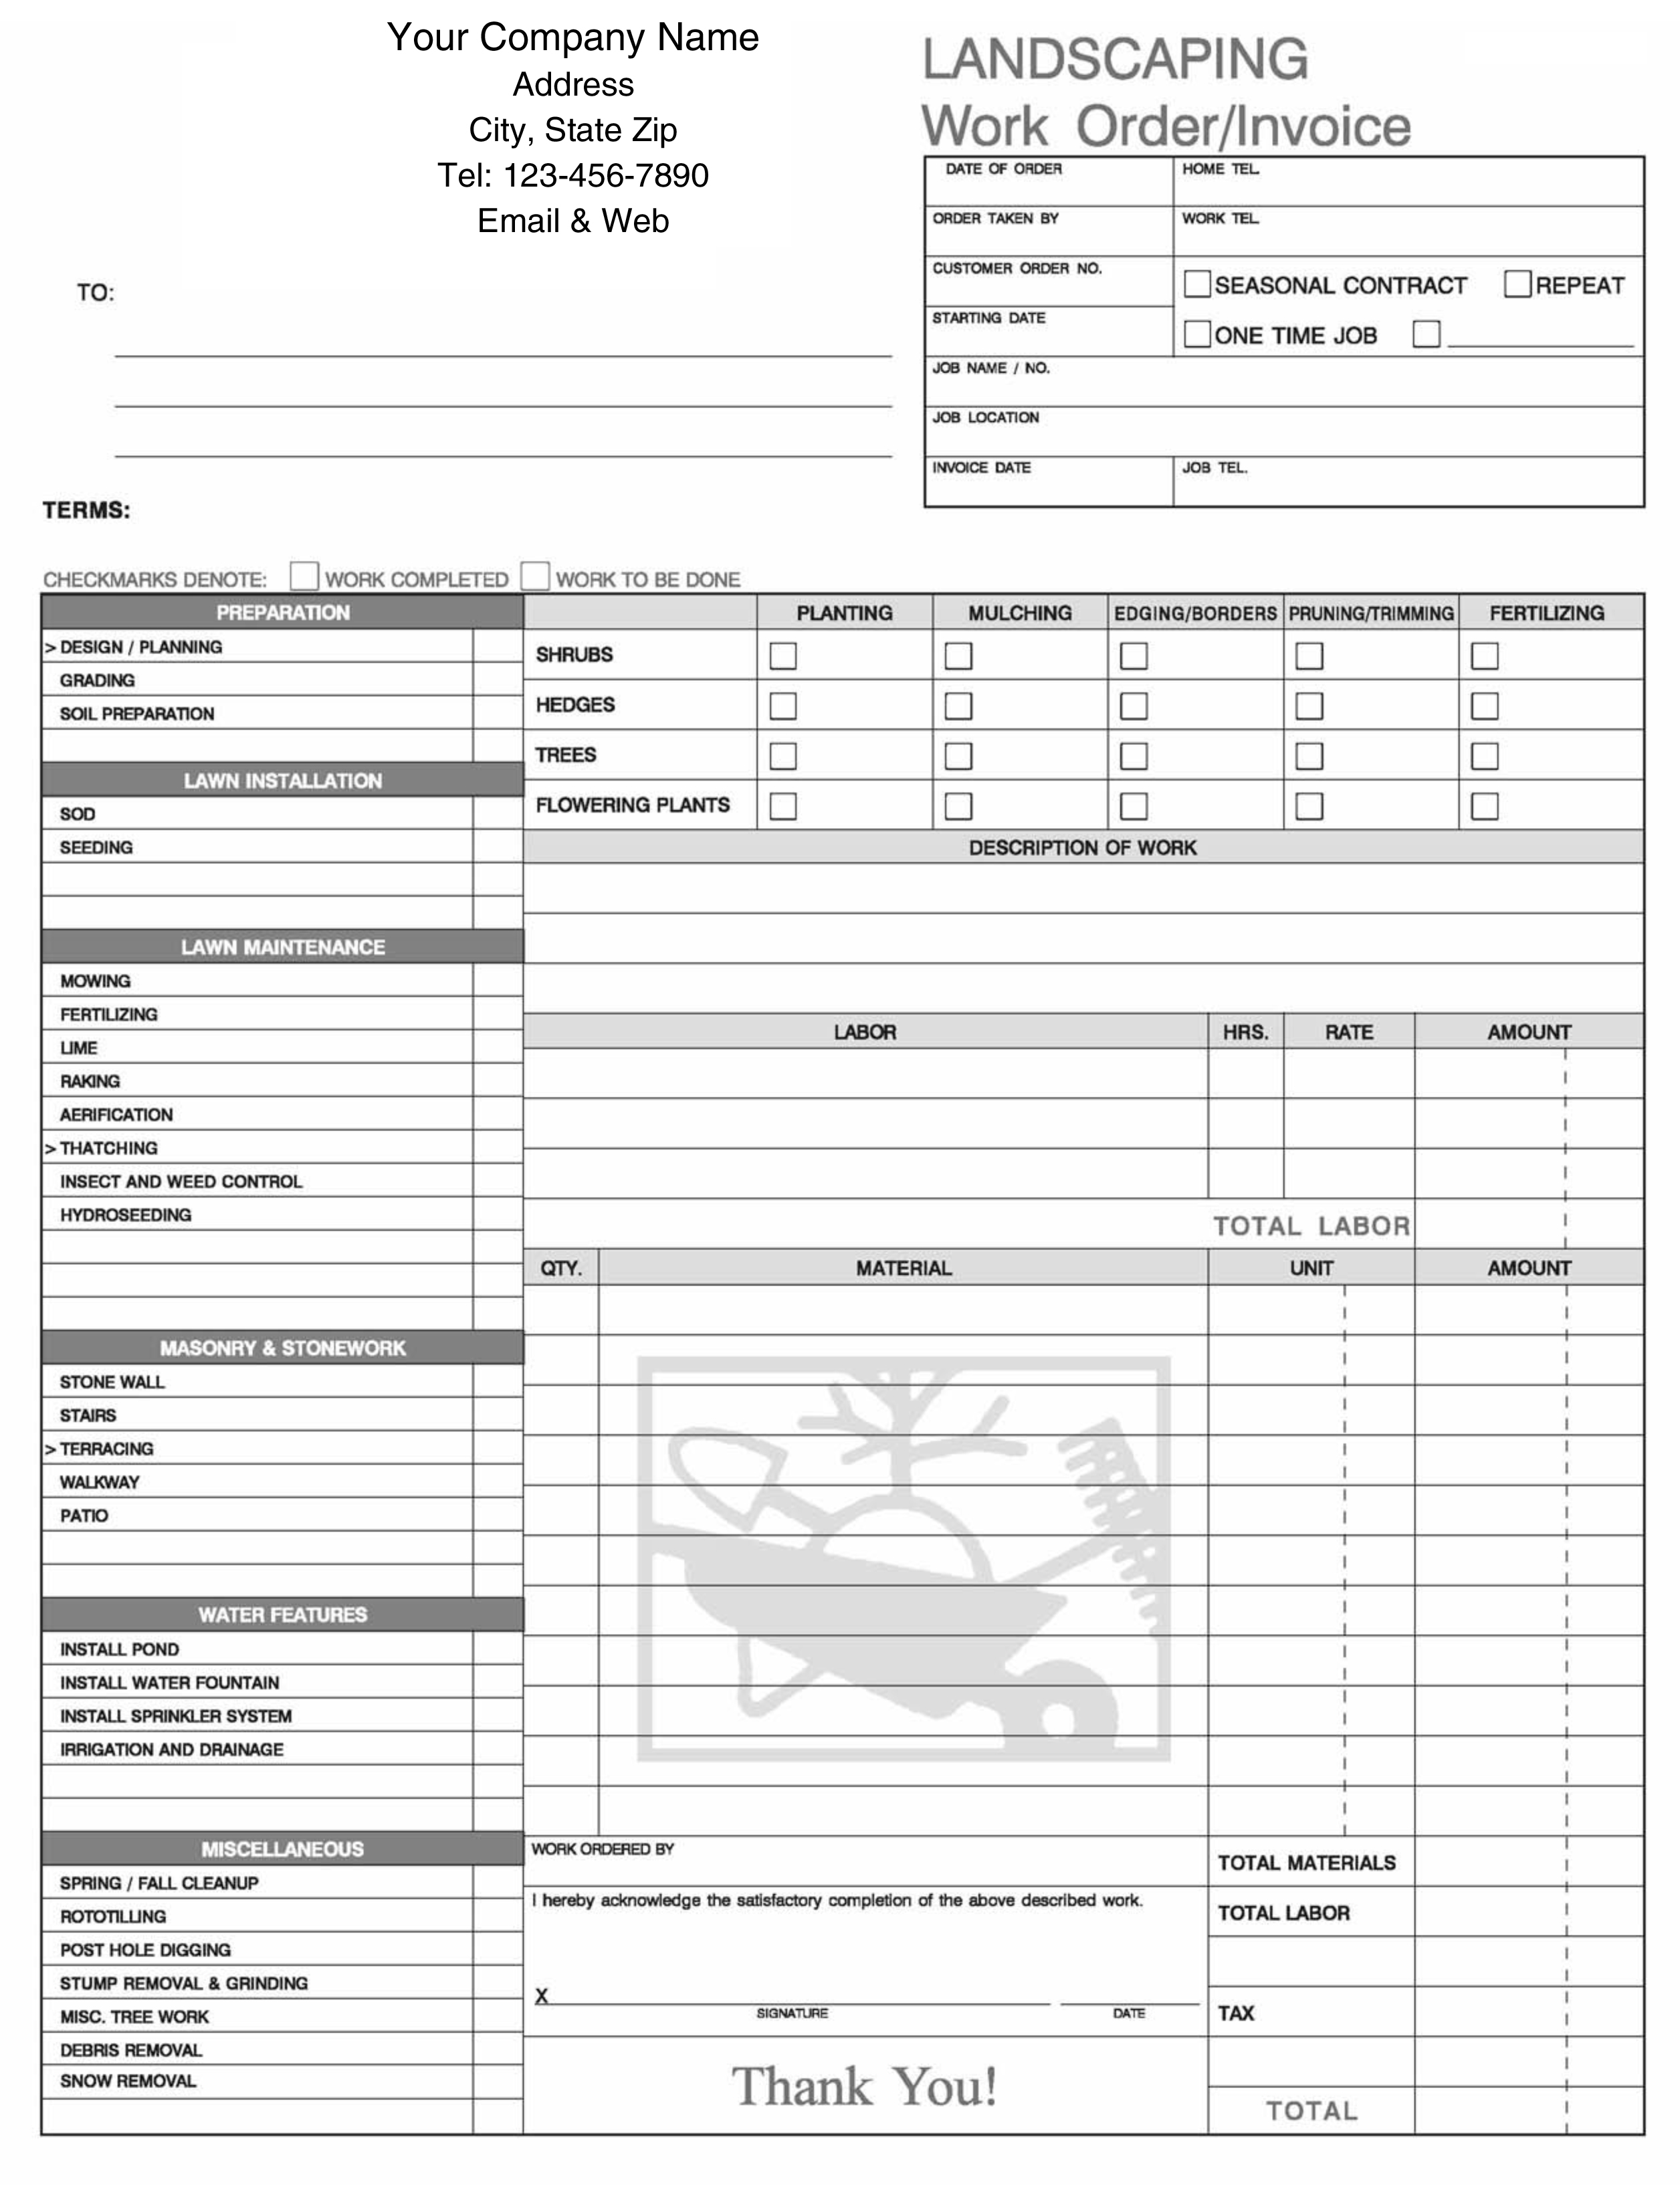 landscaping invoice template.